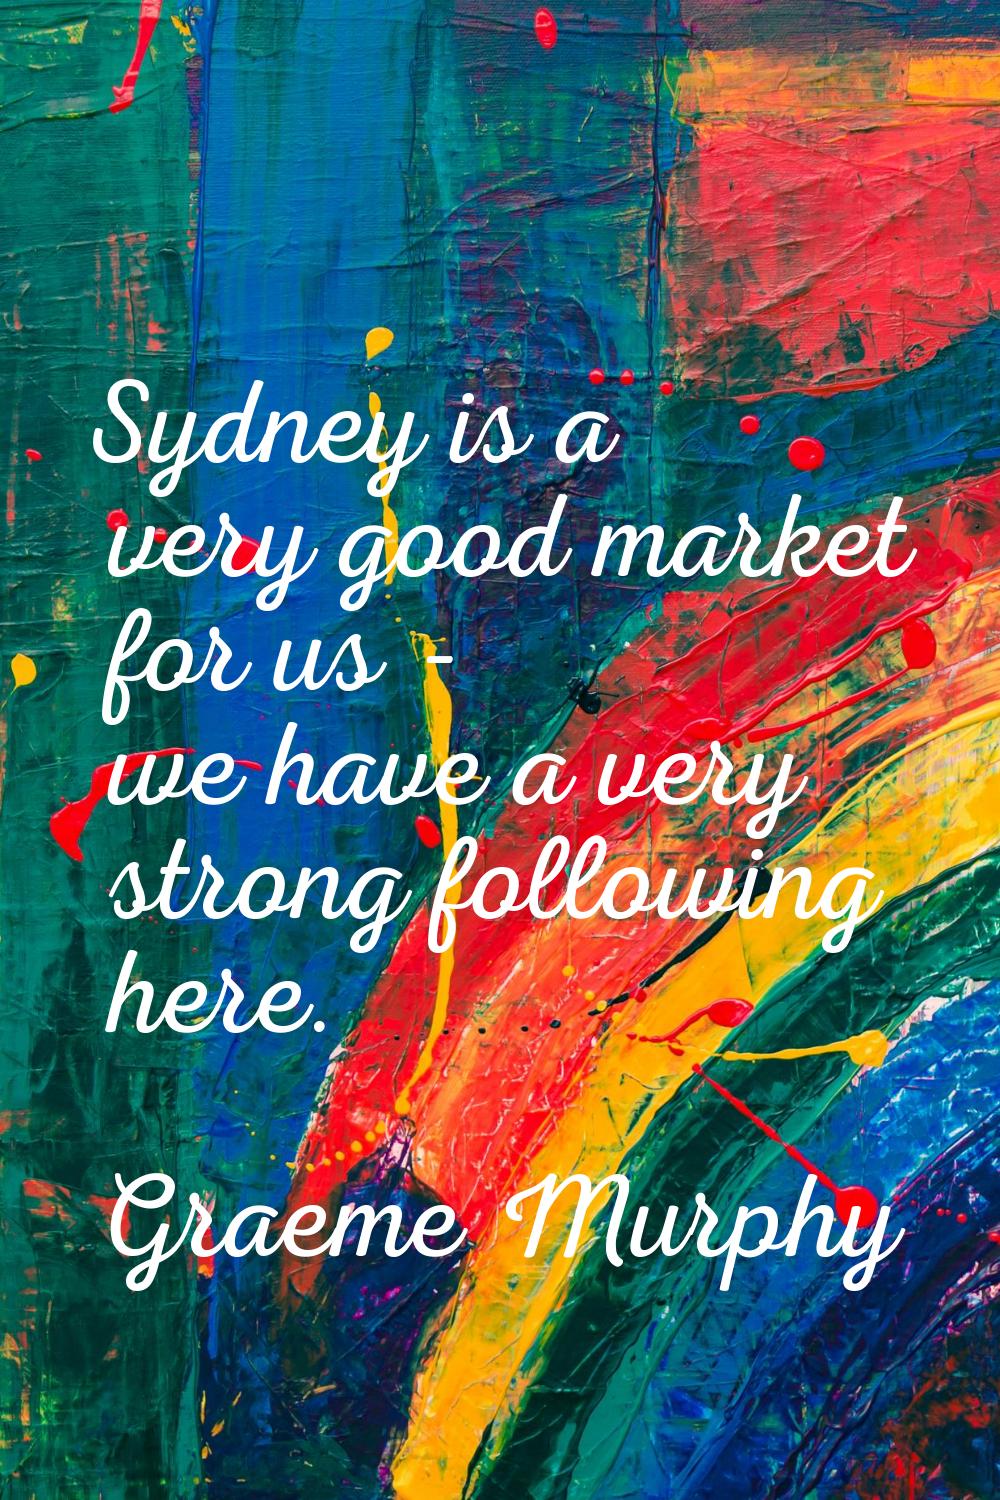 Sydney is a very good market for us - we have a very strong following here.